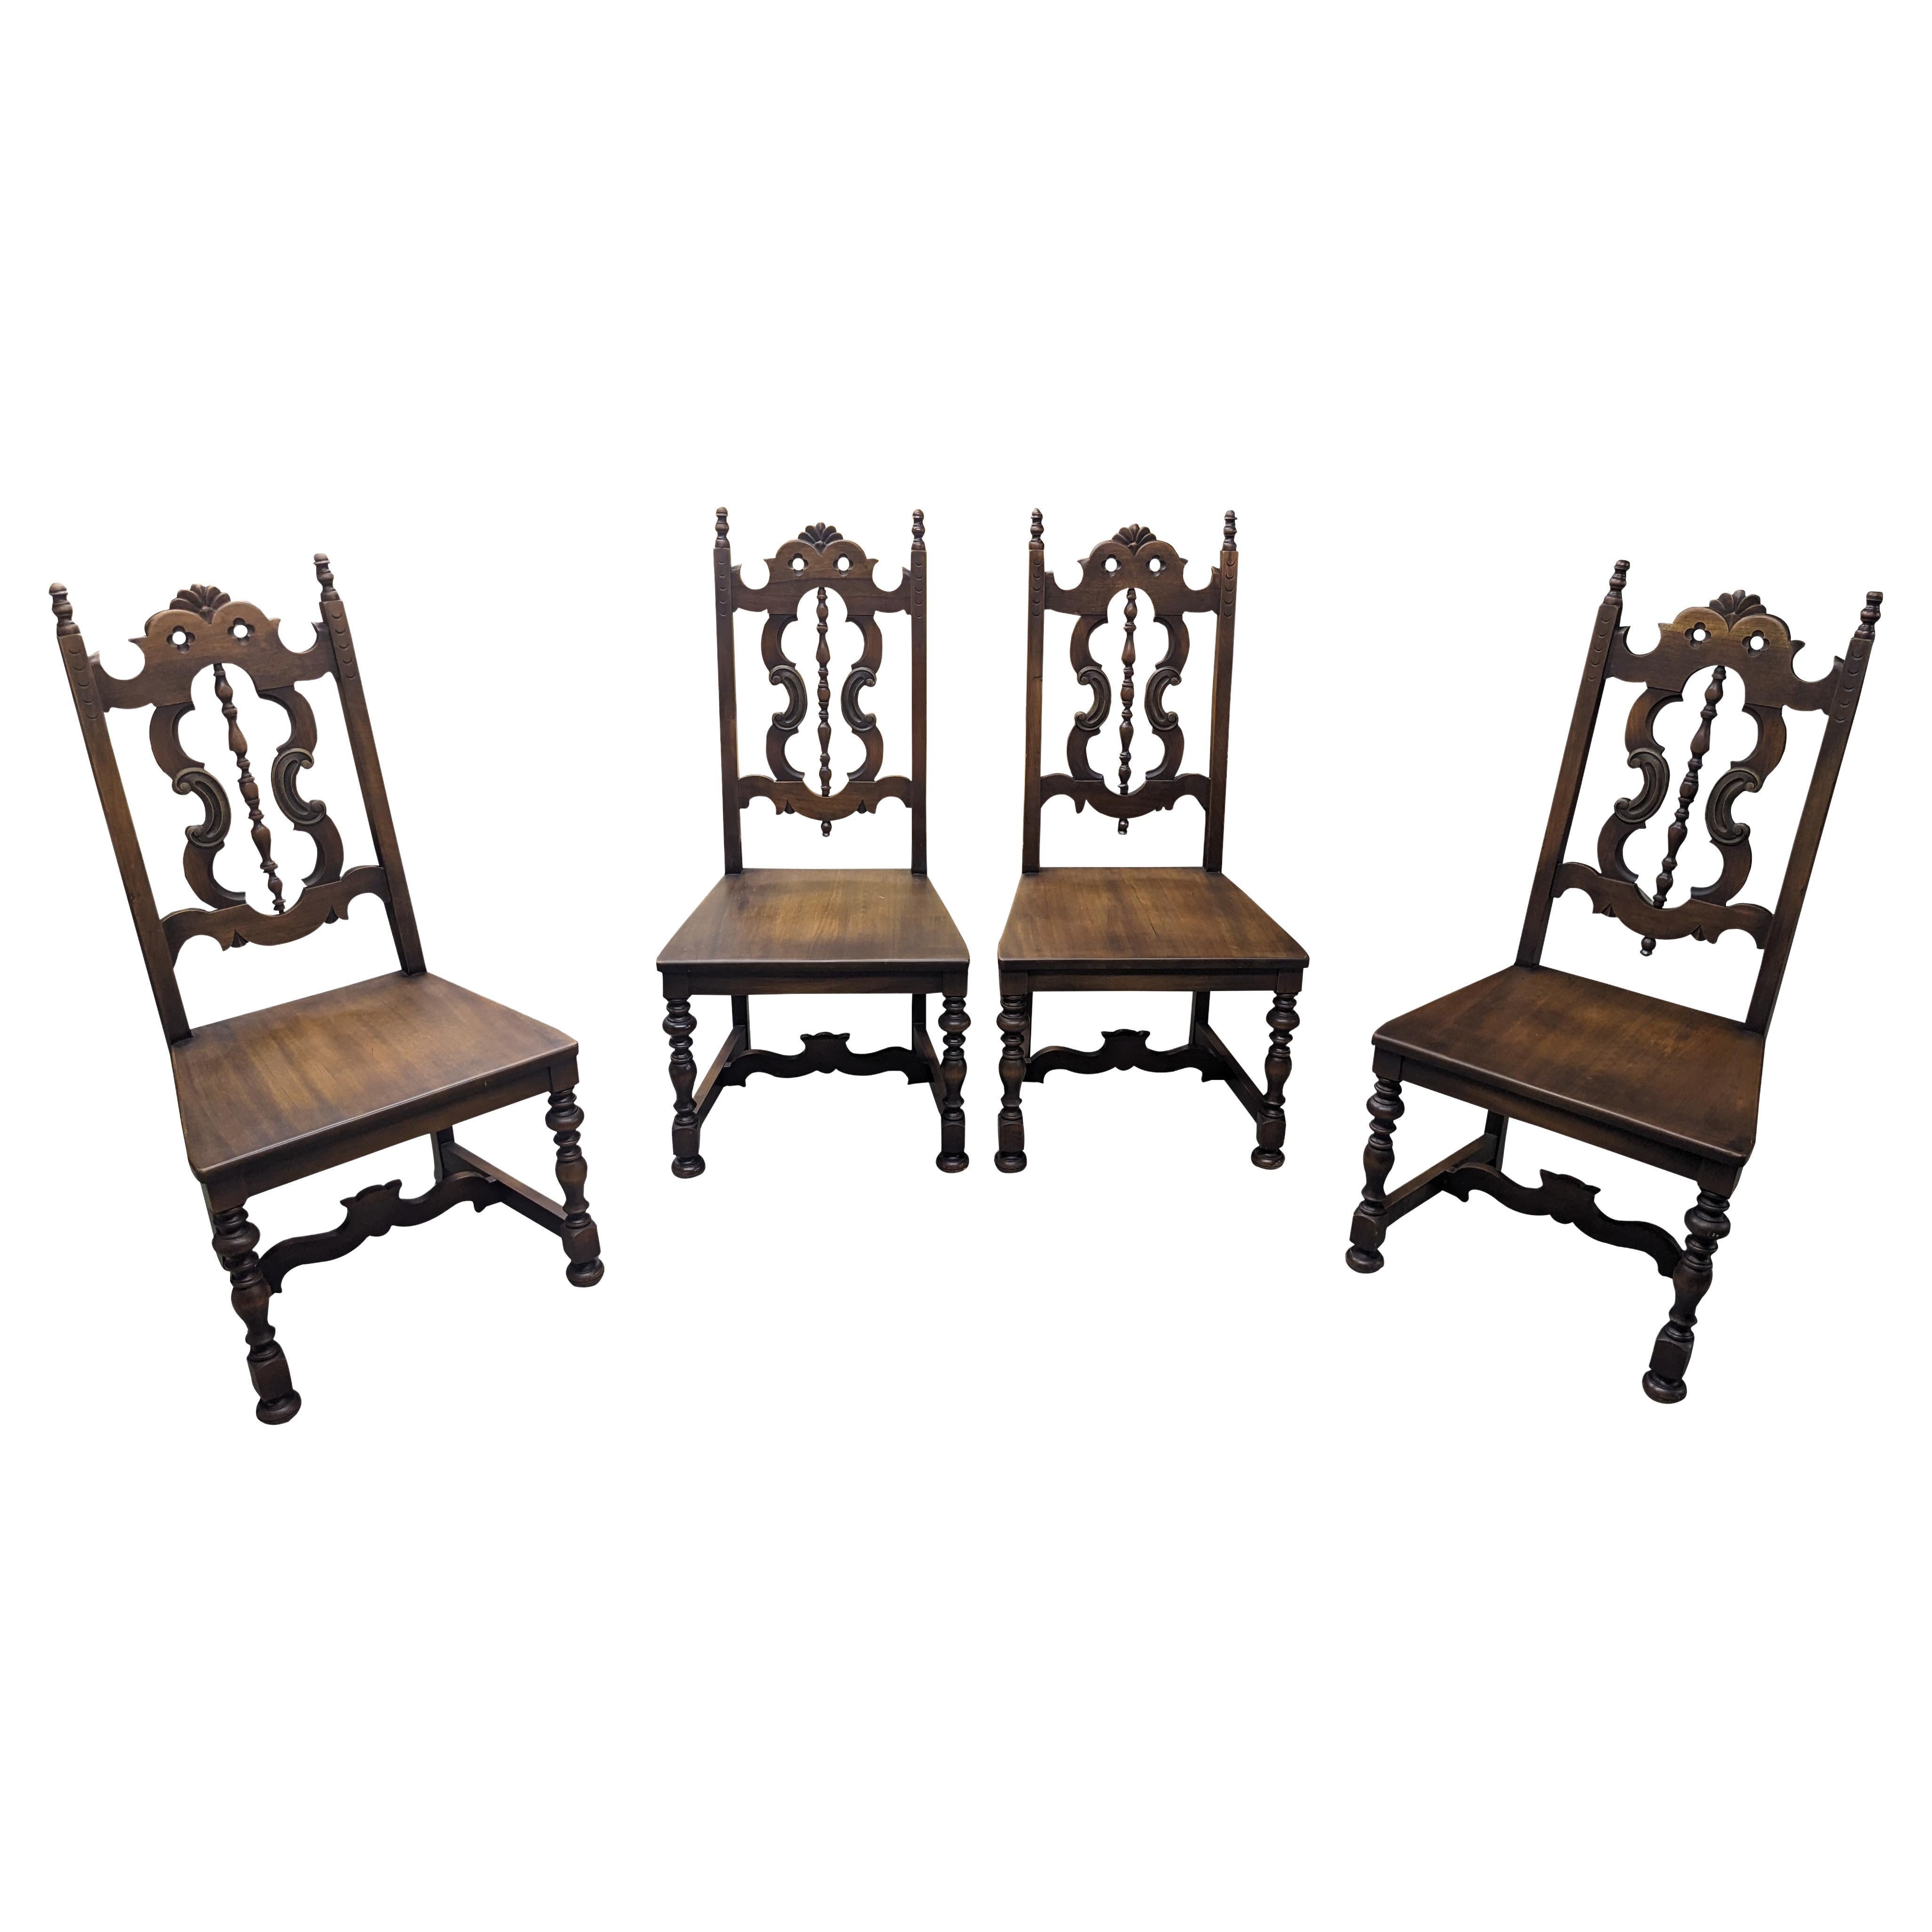 4 Antique Lifetime Furniture Jacobean Gothic Spanish Walnut Dining Chairs Set For Sale